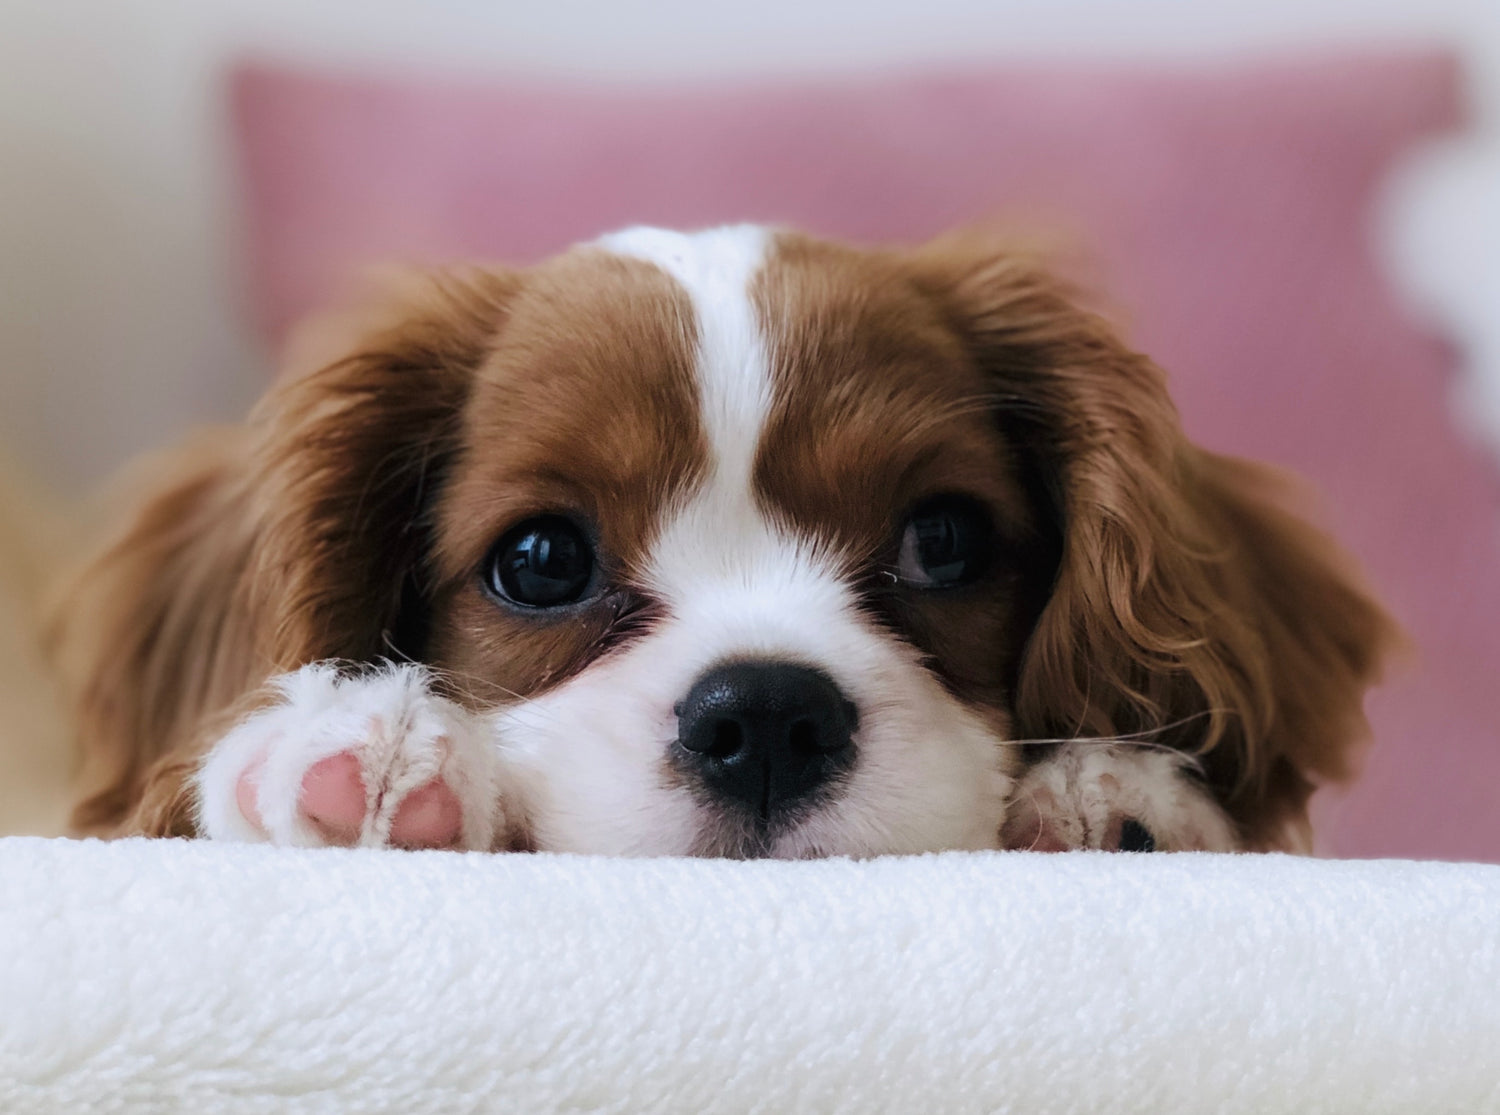 Puppy essentials: 6 products every pup' must have